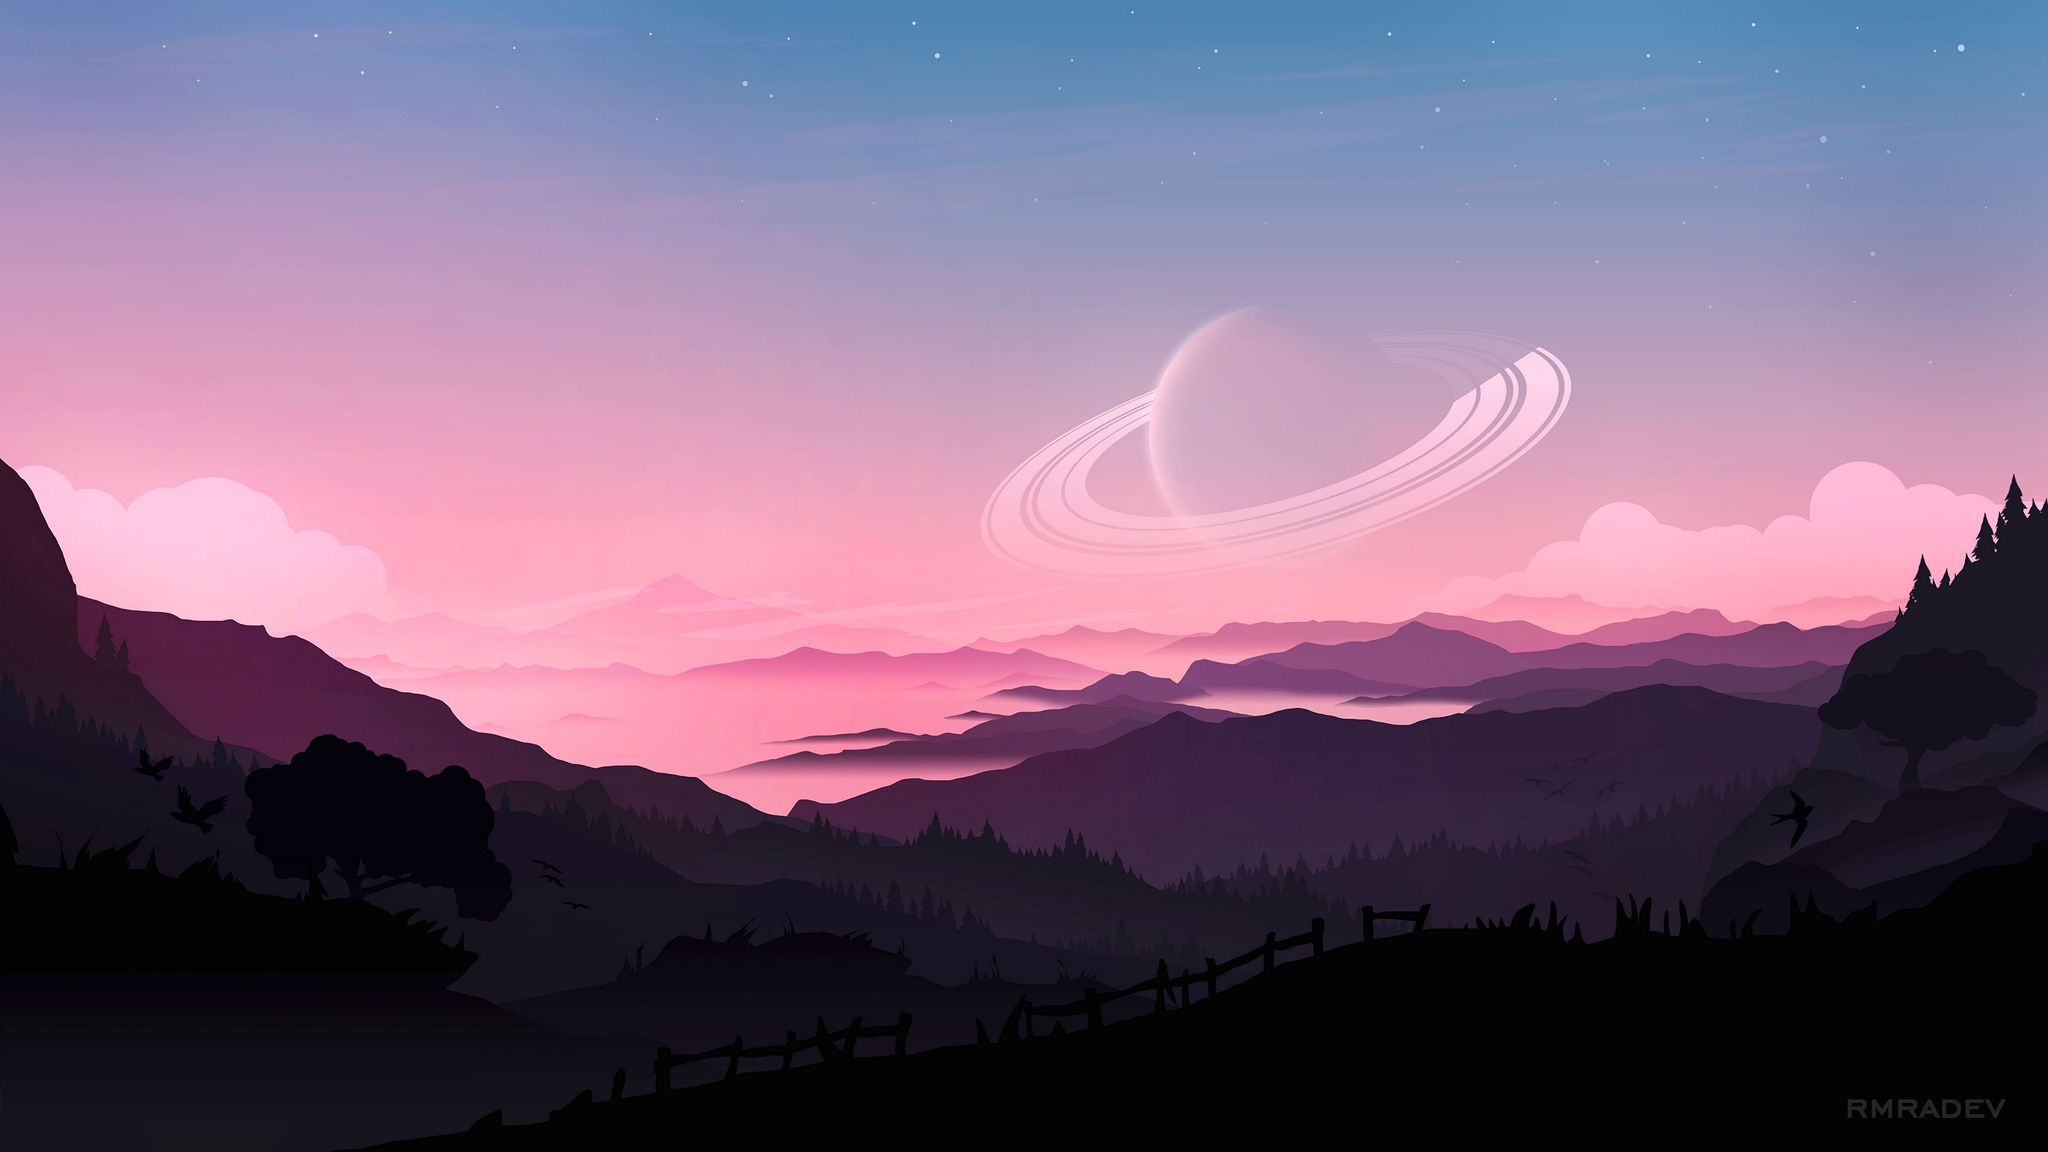 A planet hovers over a mountain range in this minimalist illustration. - 2048x1152